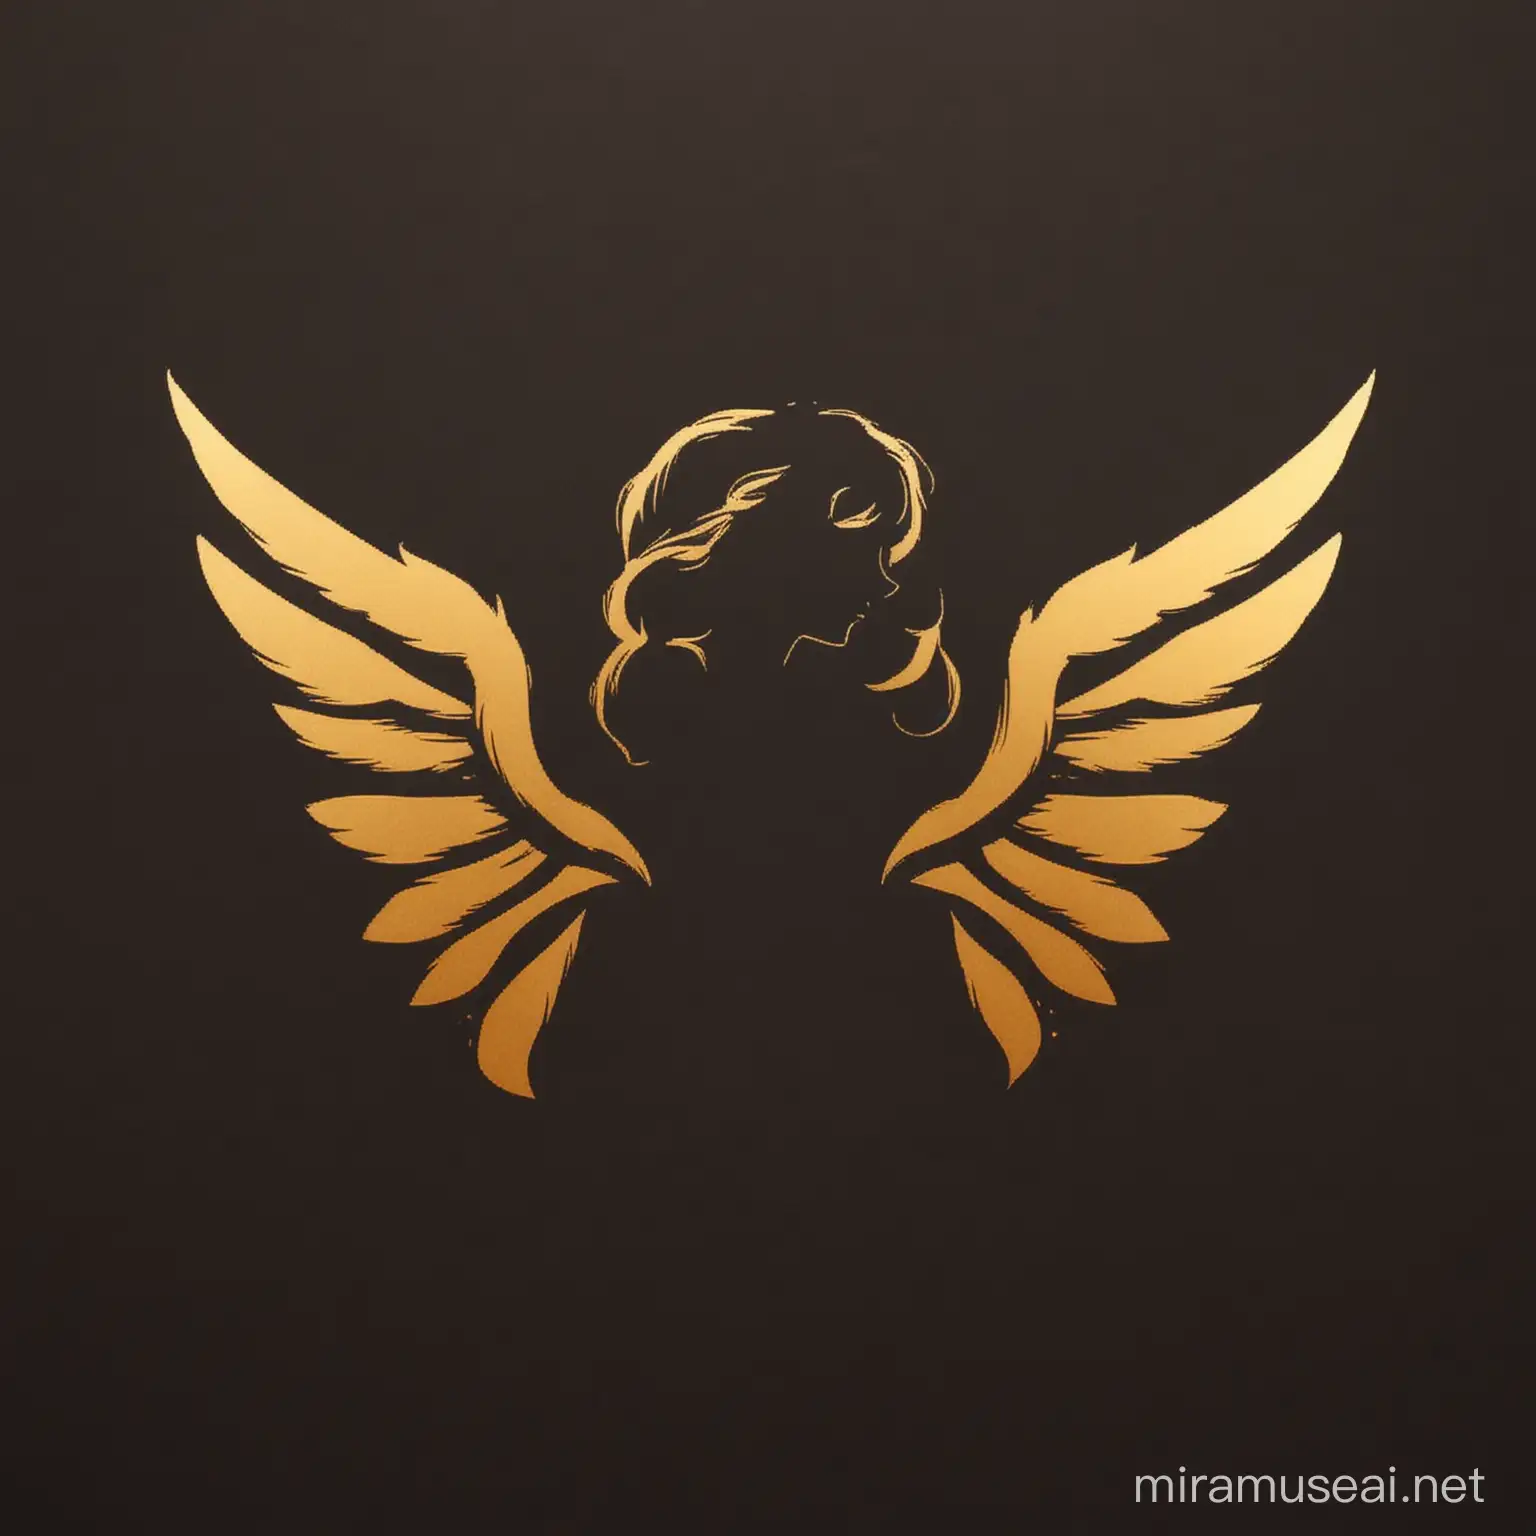 A simple logo in the shape of a girl with wings. Gold. Silhouette. Single color